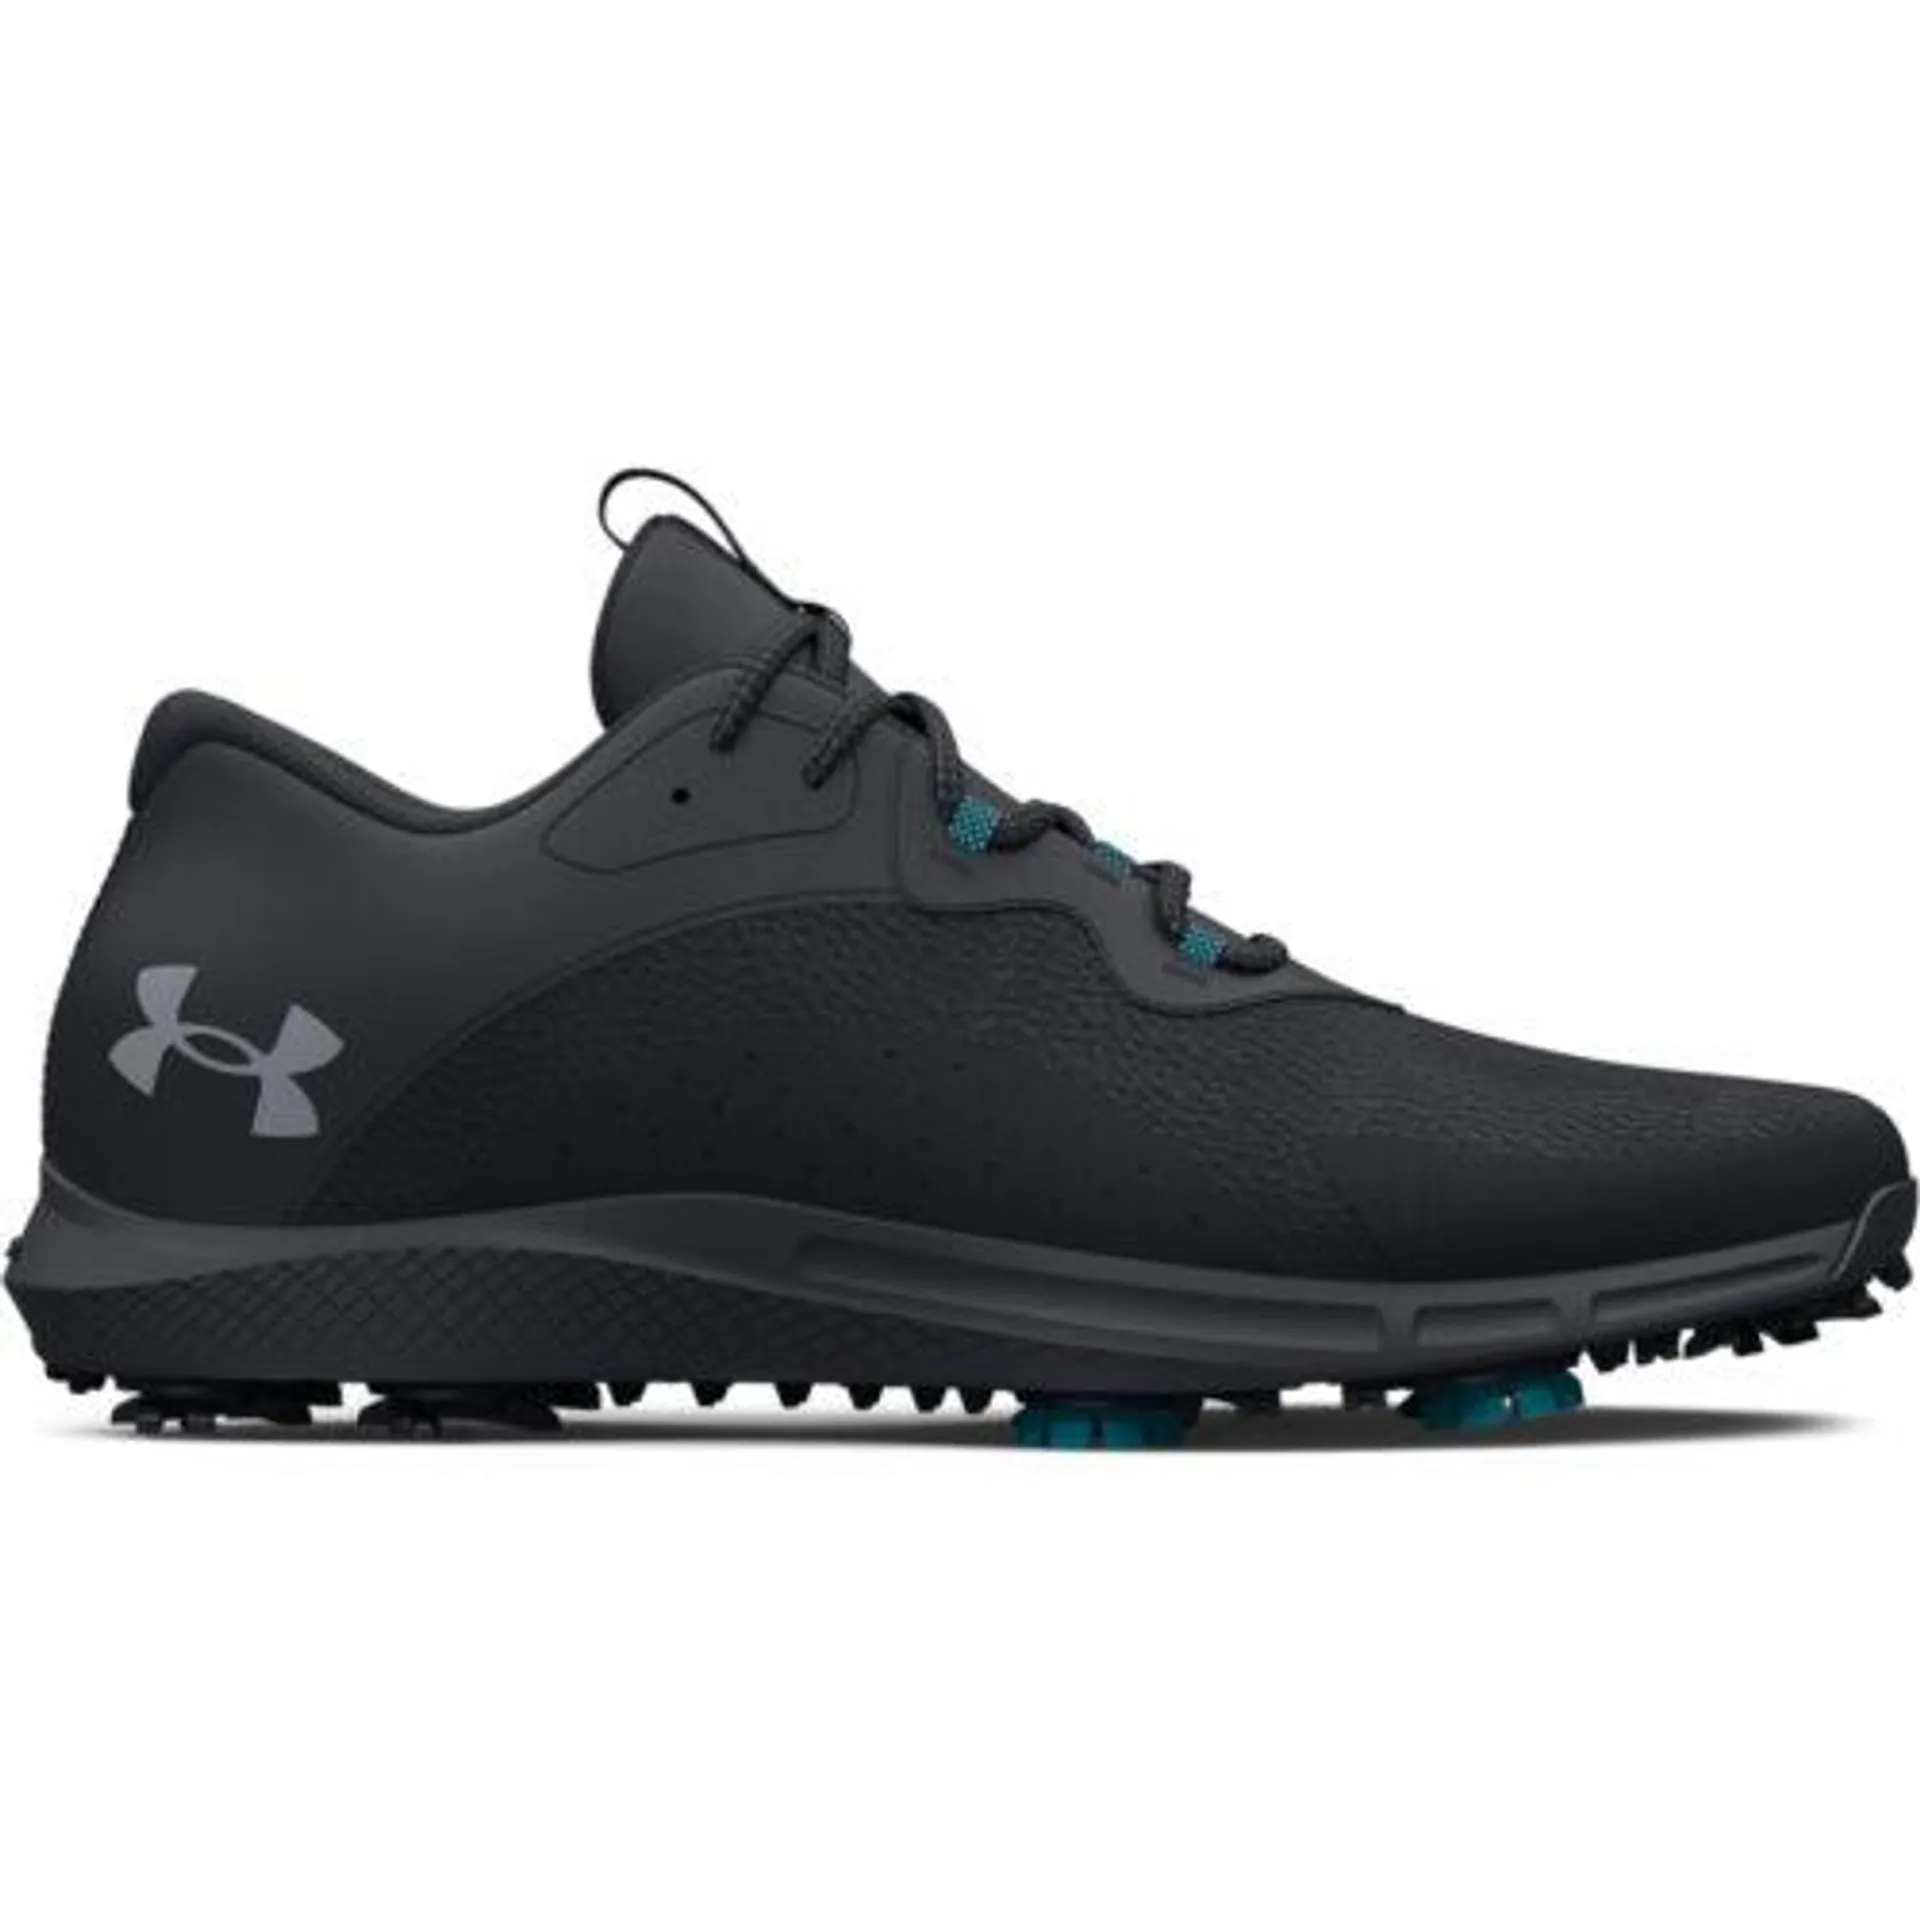 Under Armour Charged Draw 2 Wide Shoes – Black 3026401-002